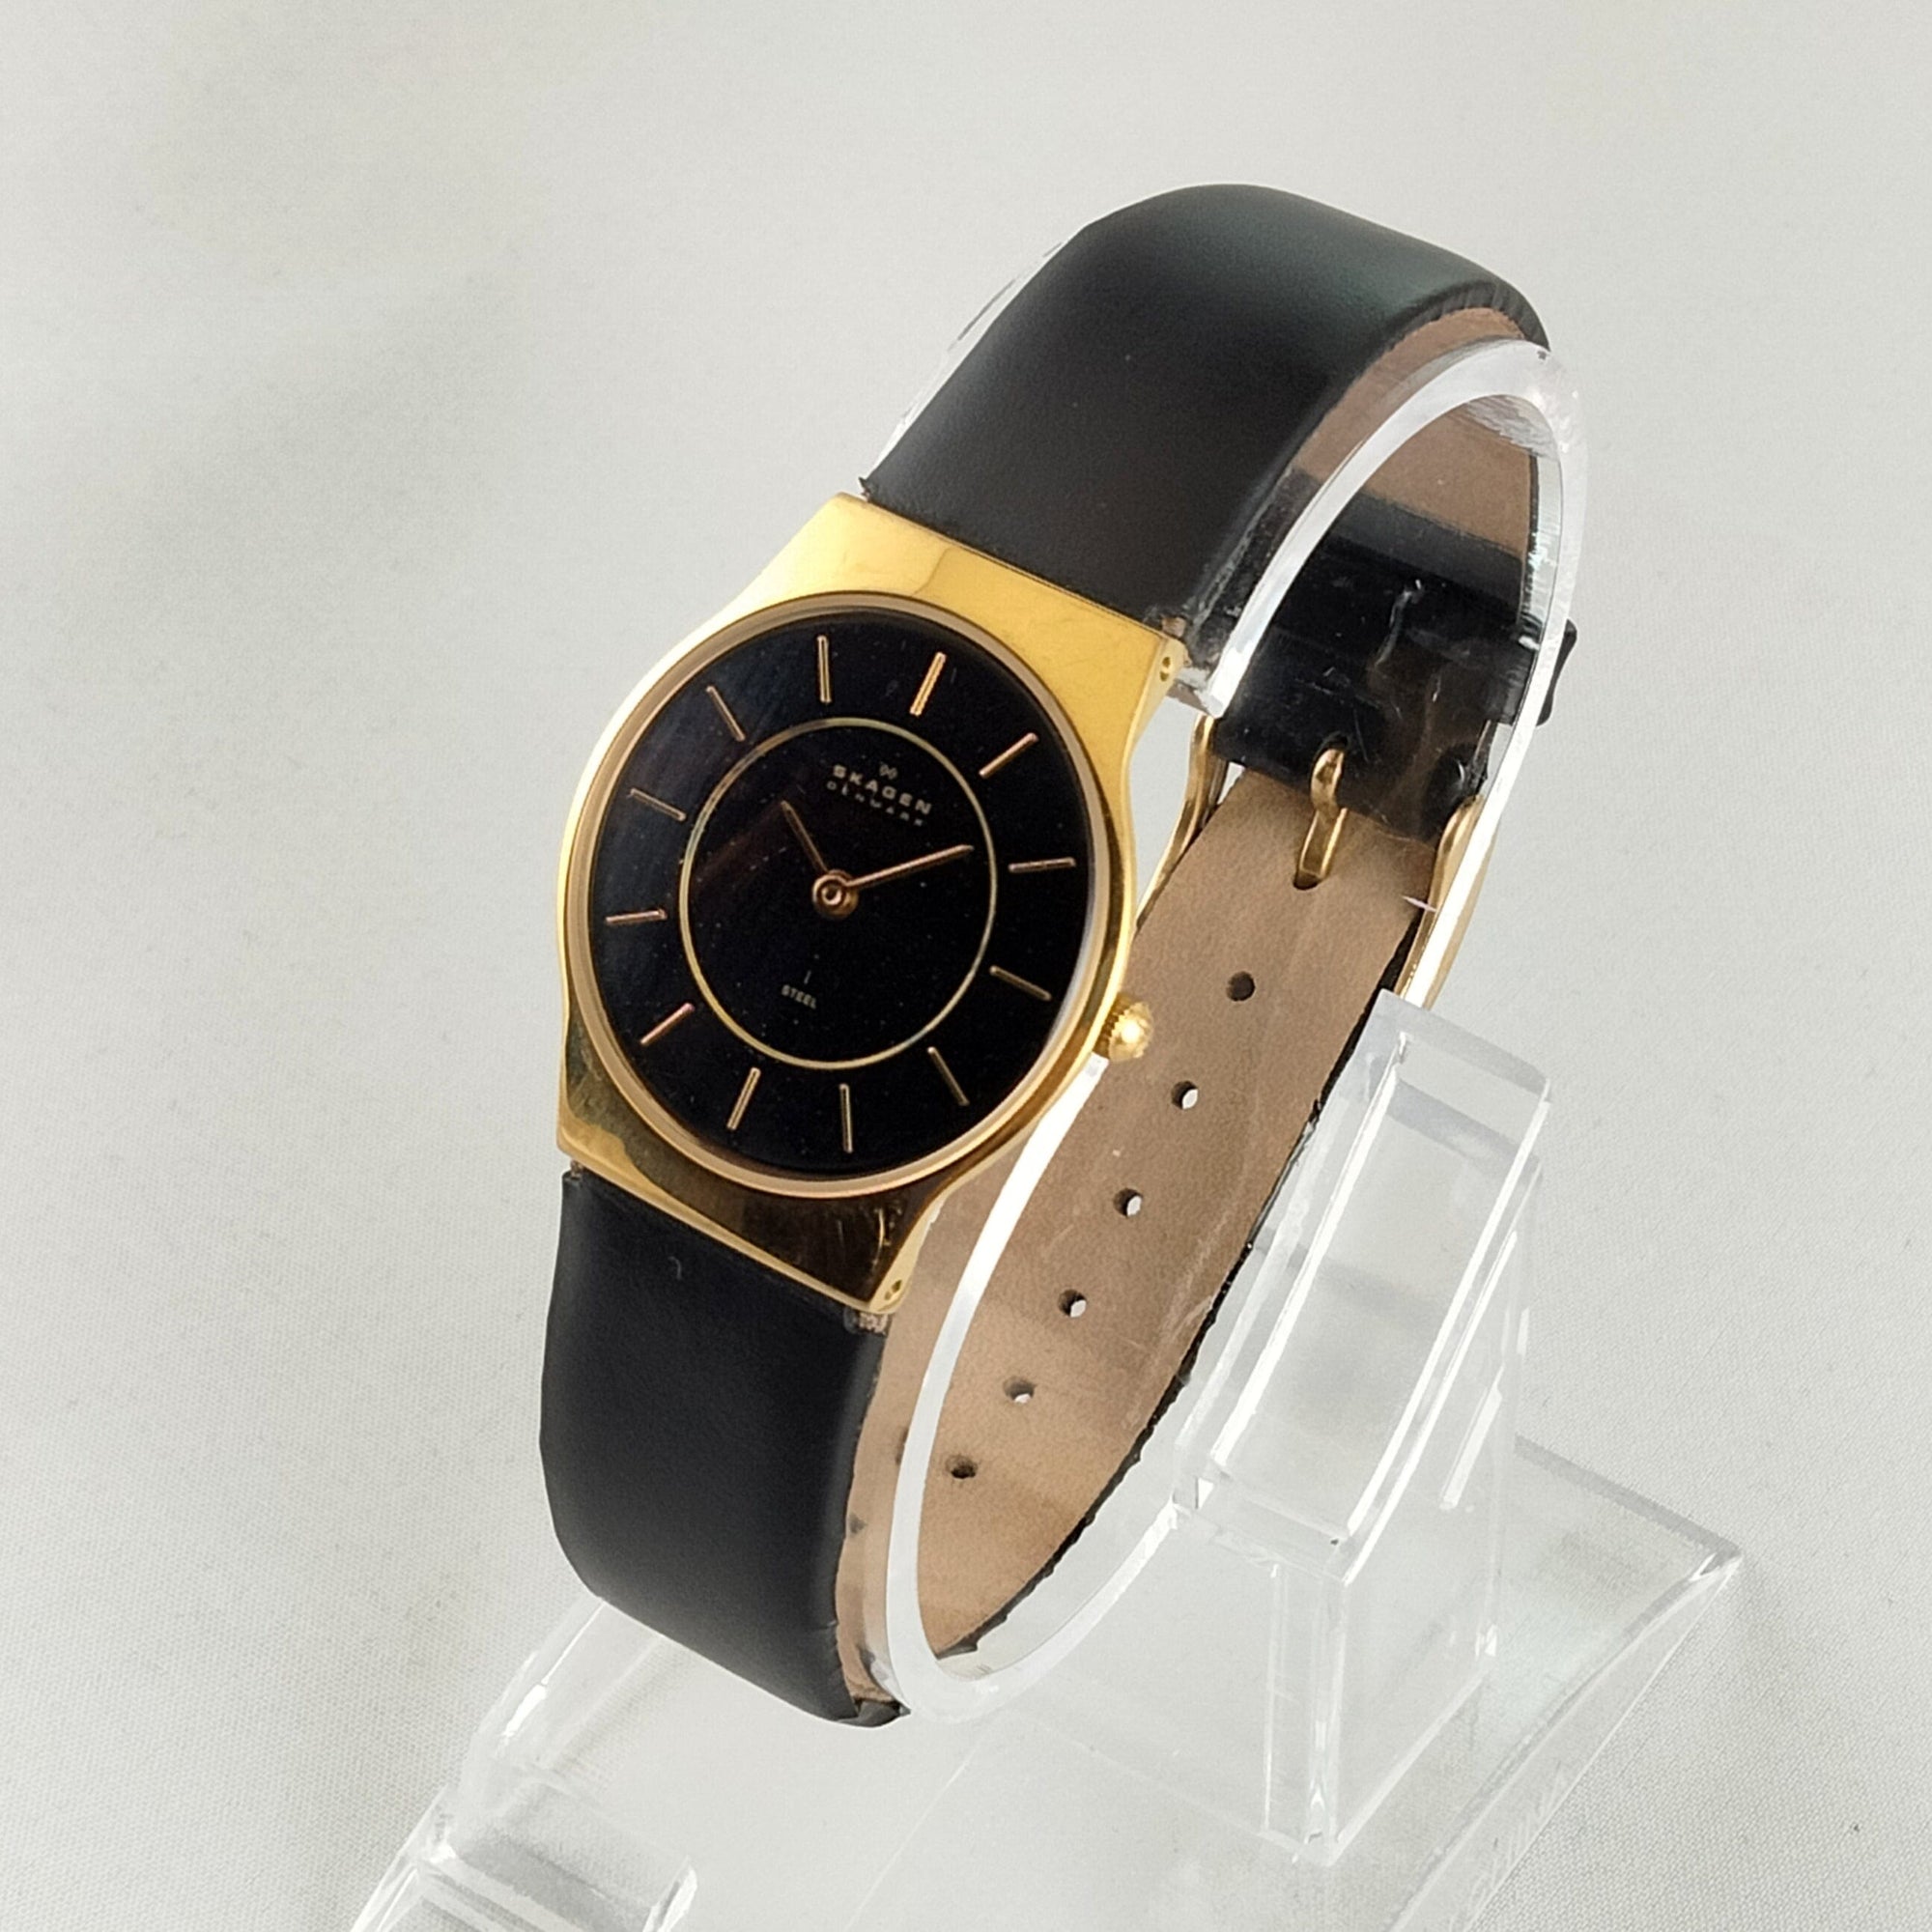 I Like Mikes Mid Century Modern Watches Skagen Unisex Stainless Steel Gold Tone Watch, Black Dial, Black Genuine Leather Strap